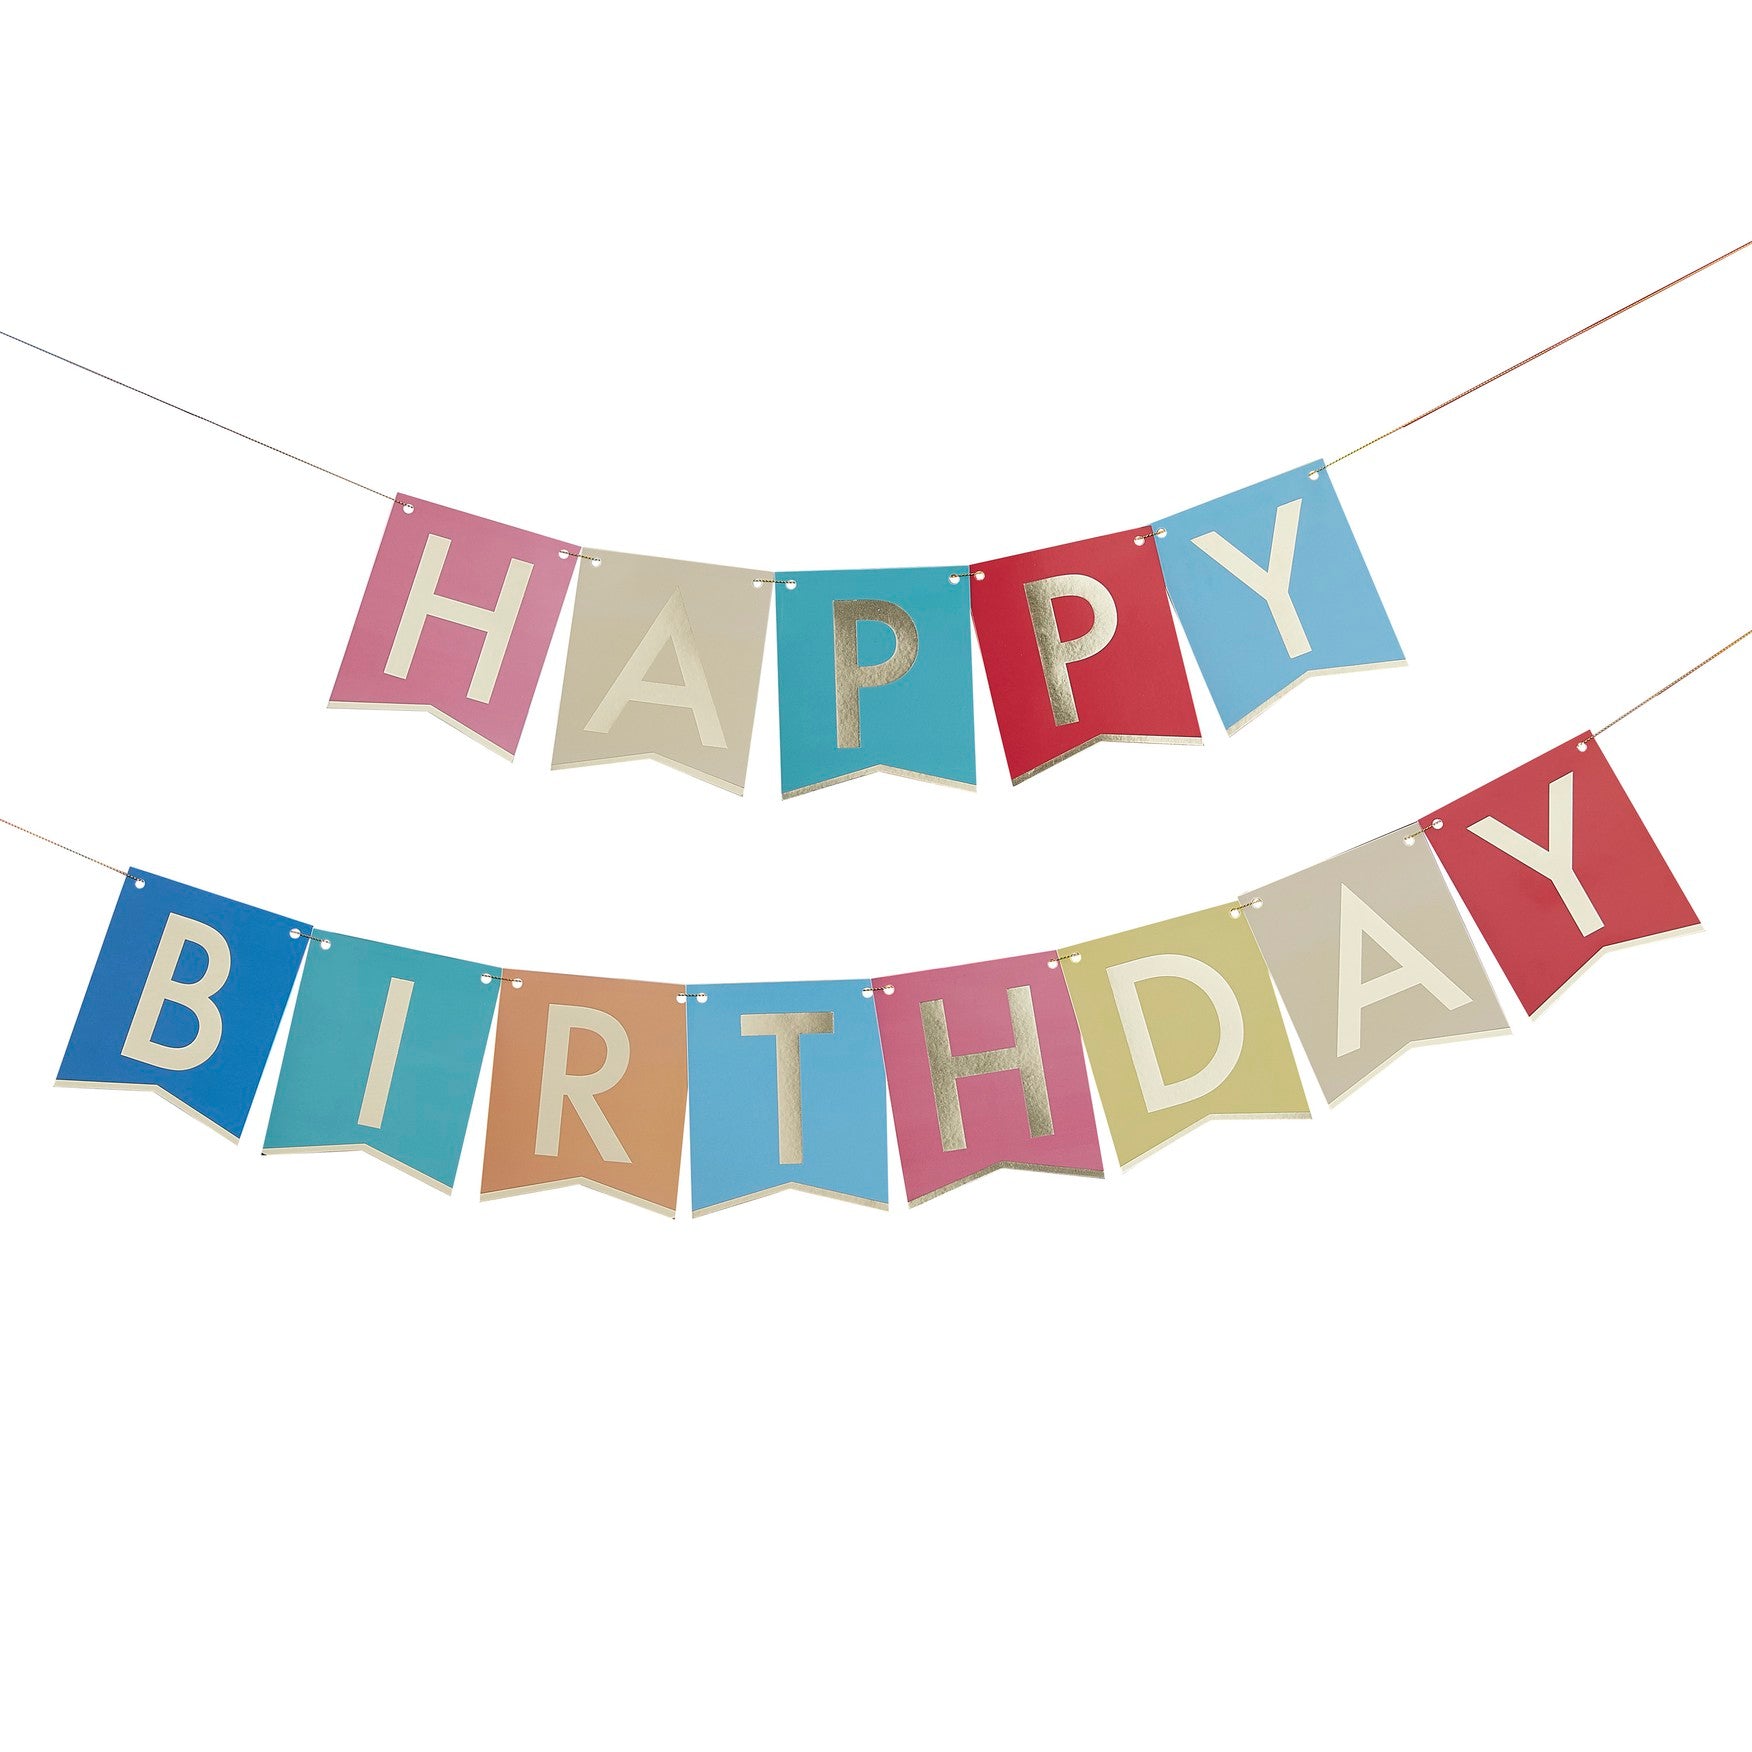 Birthday banner with colorful flags and golden lettering 2 x 1.7 m